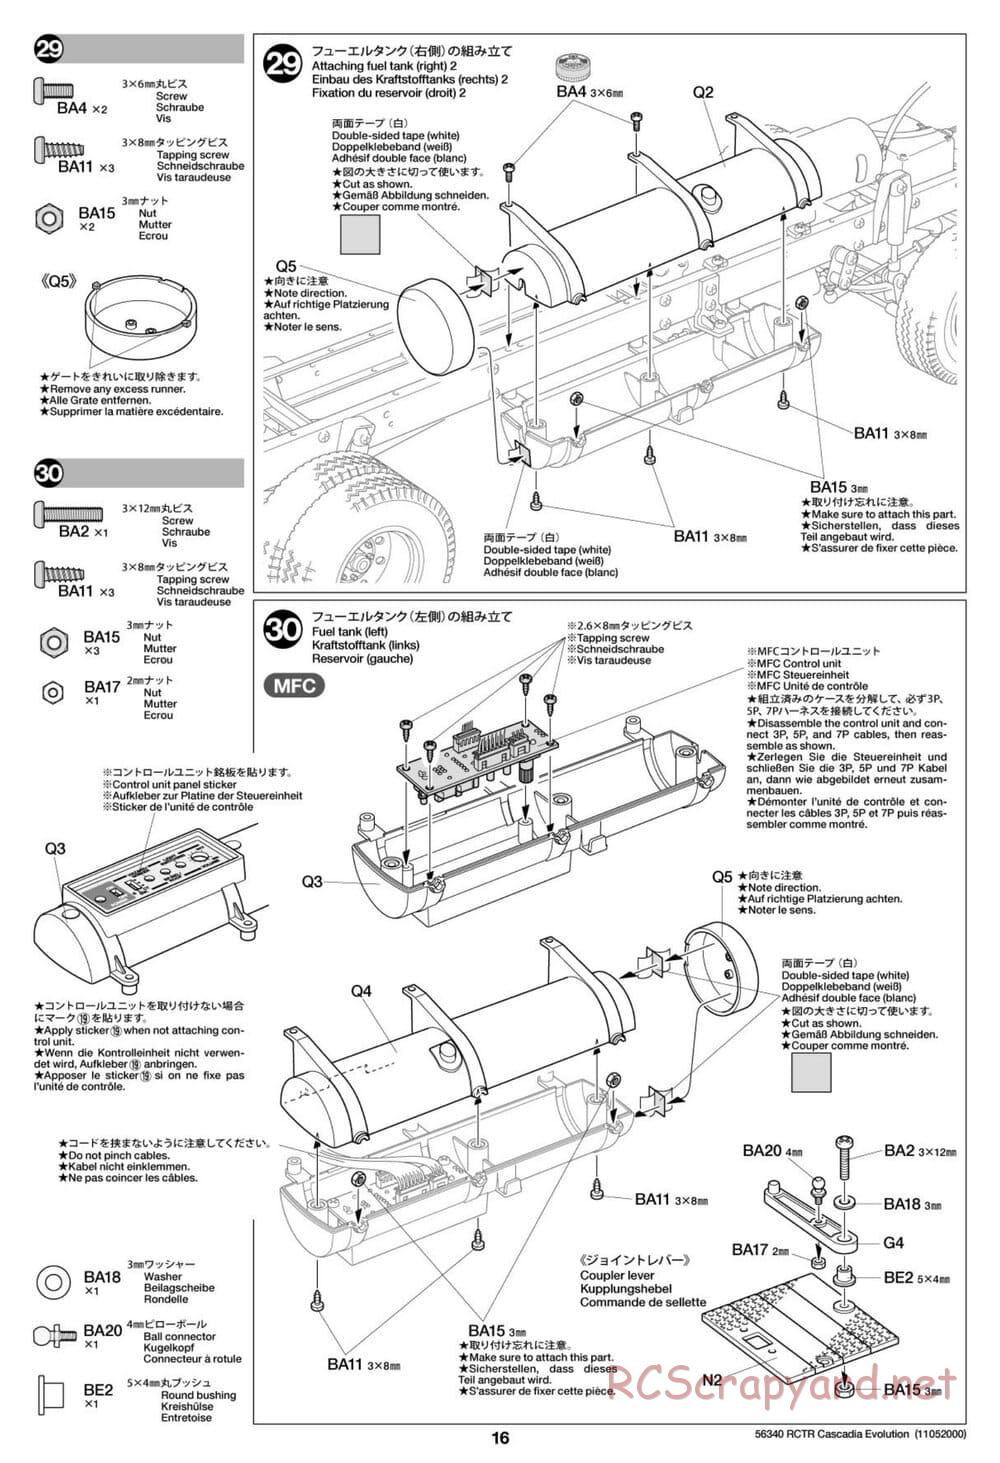 Tamiya - Freightliner Cascadia Evolution Tractor Truck Chassis - Manual - Page 16